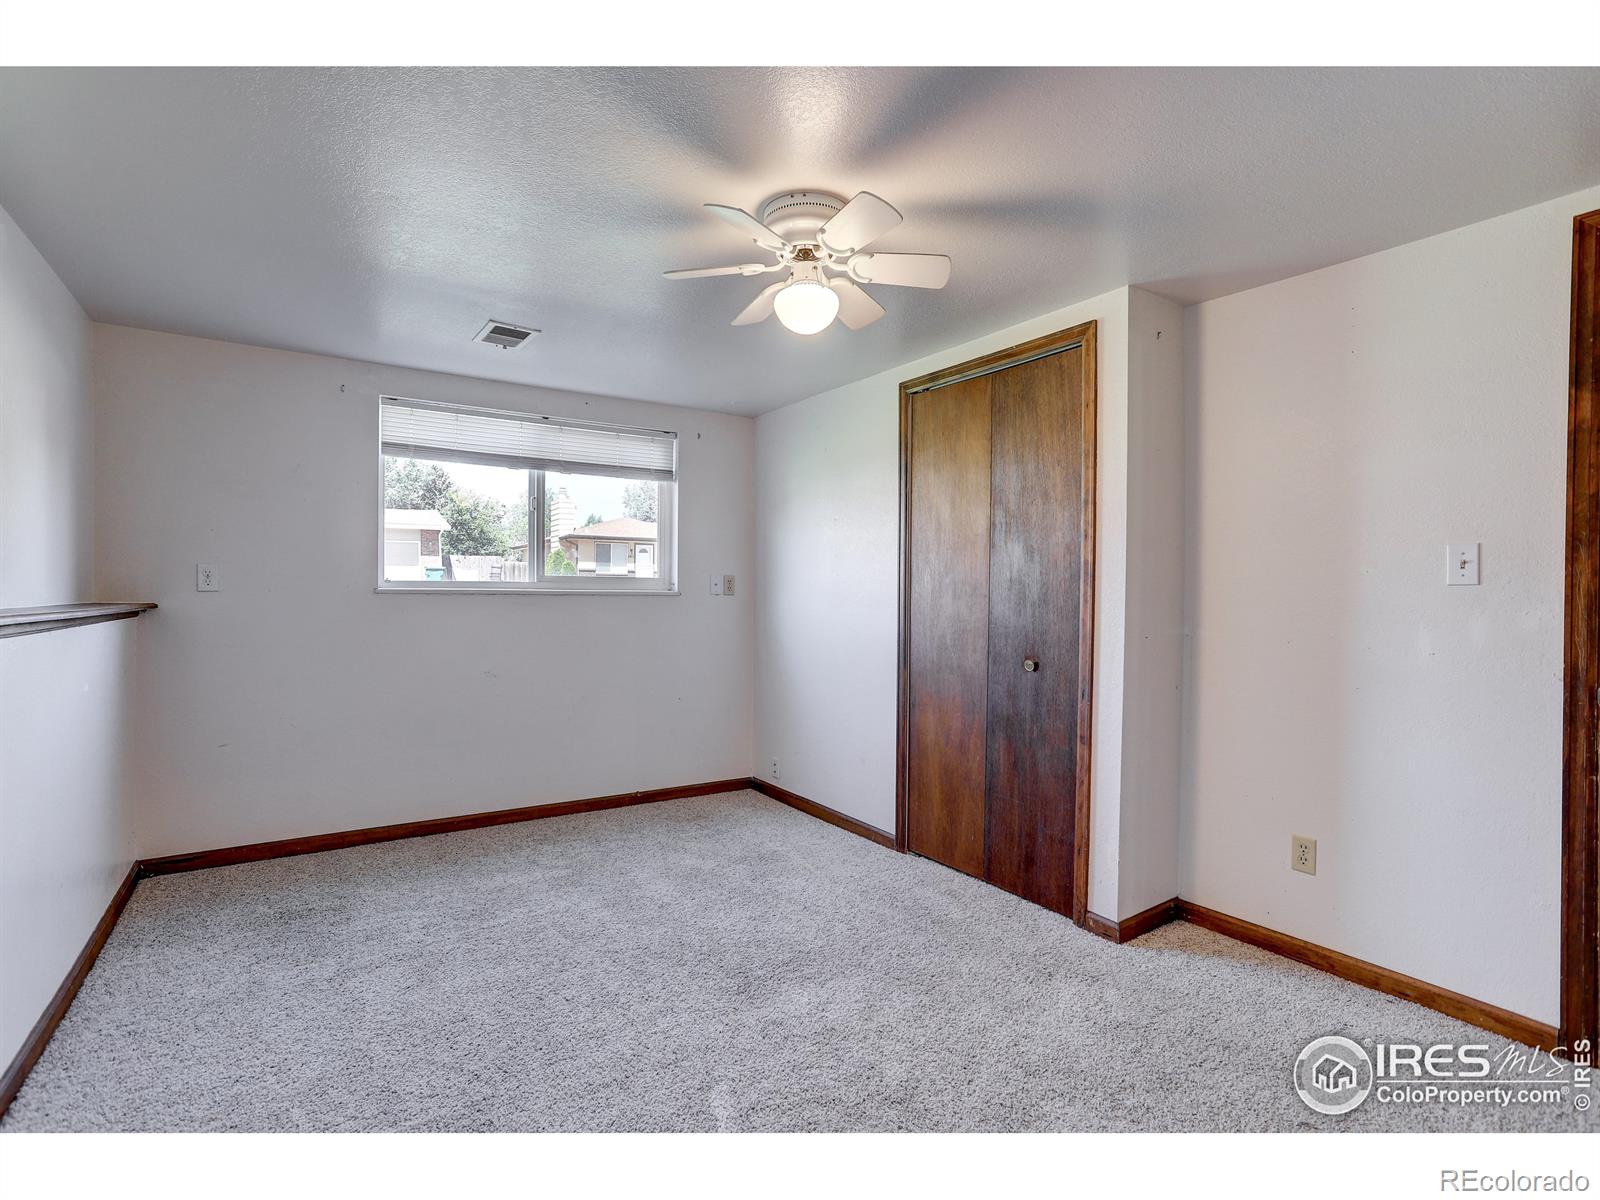 172 45th, Greeley, CO